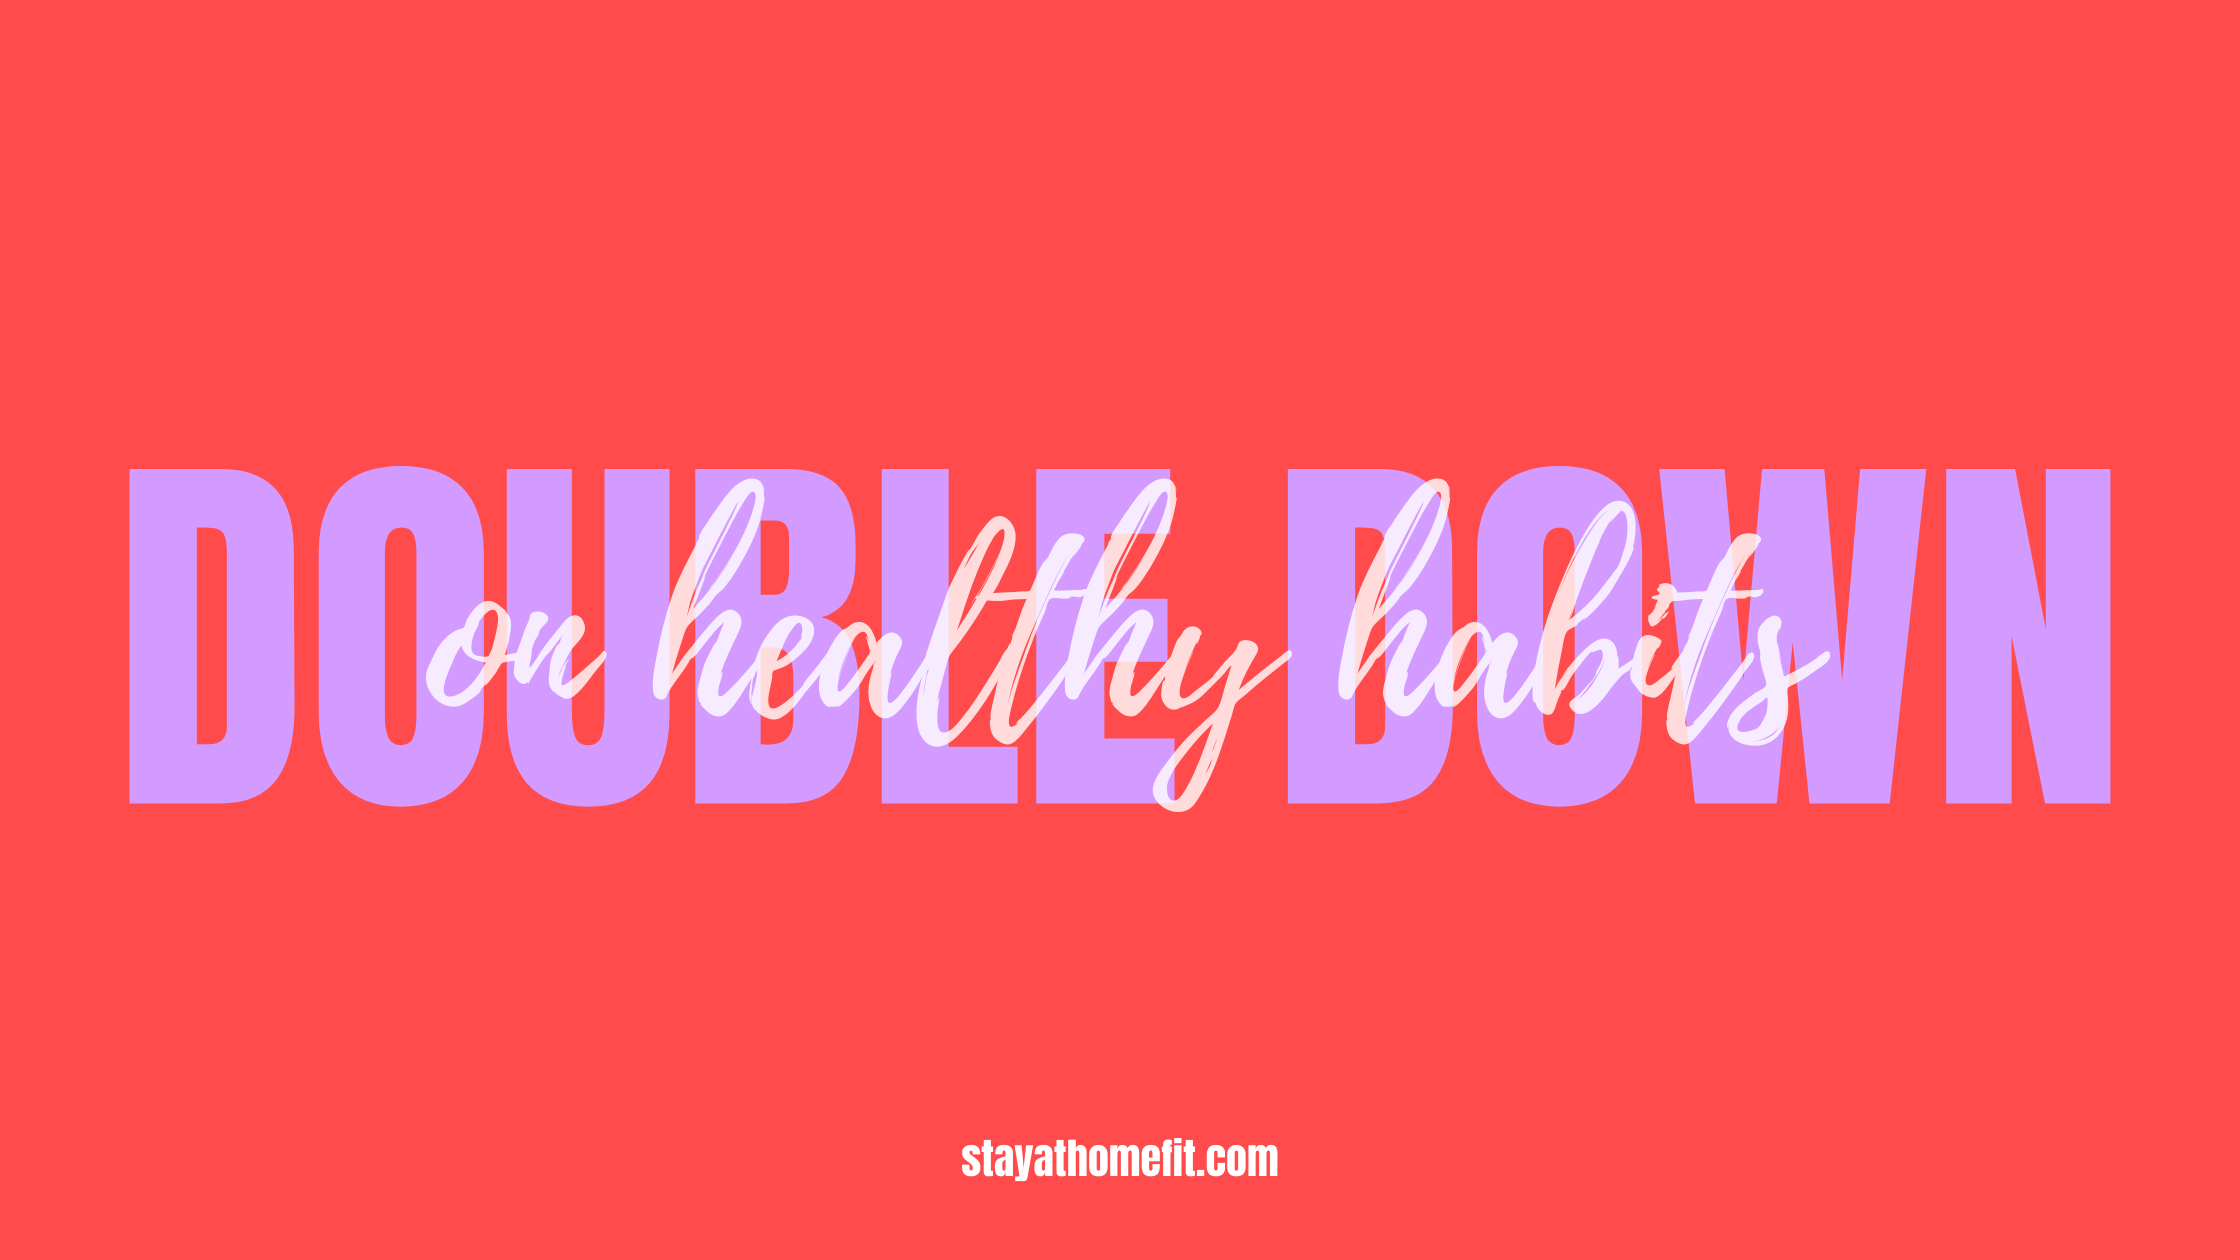 Blog Title: Double Down on Healthy Habits